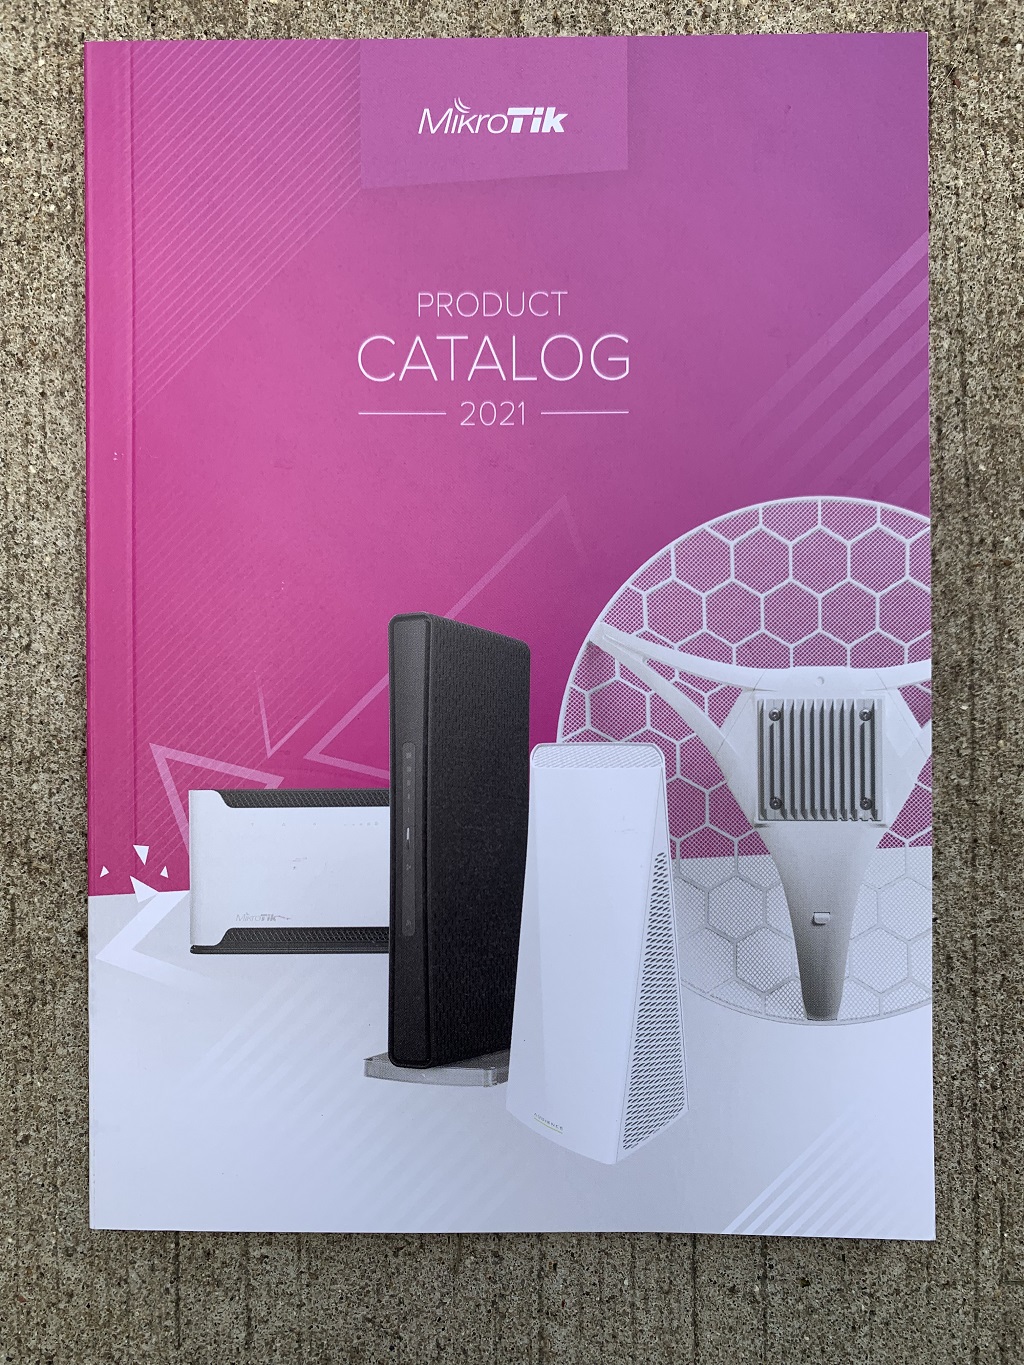 Mikrotik RouterBoard Brochure 2021 Color Catalog showing all current and new Mikrotik Products